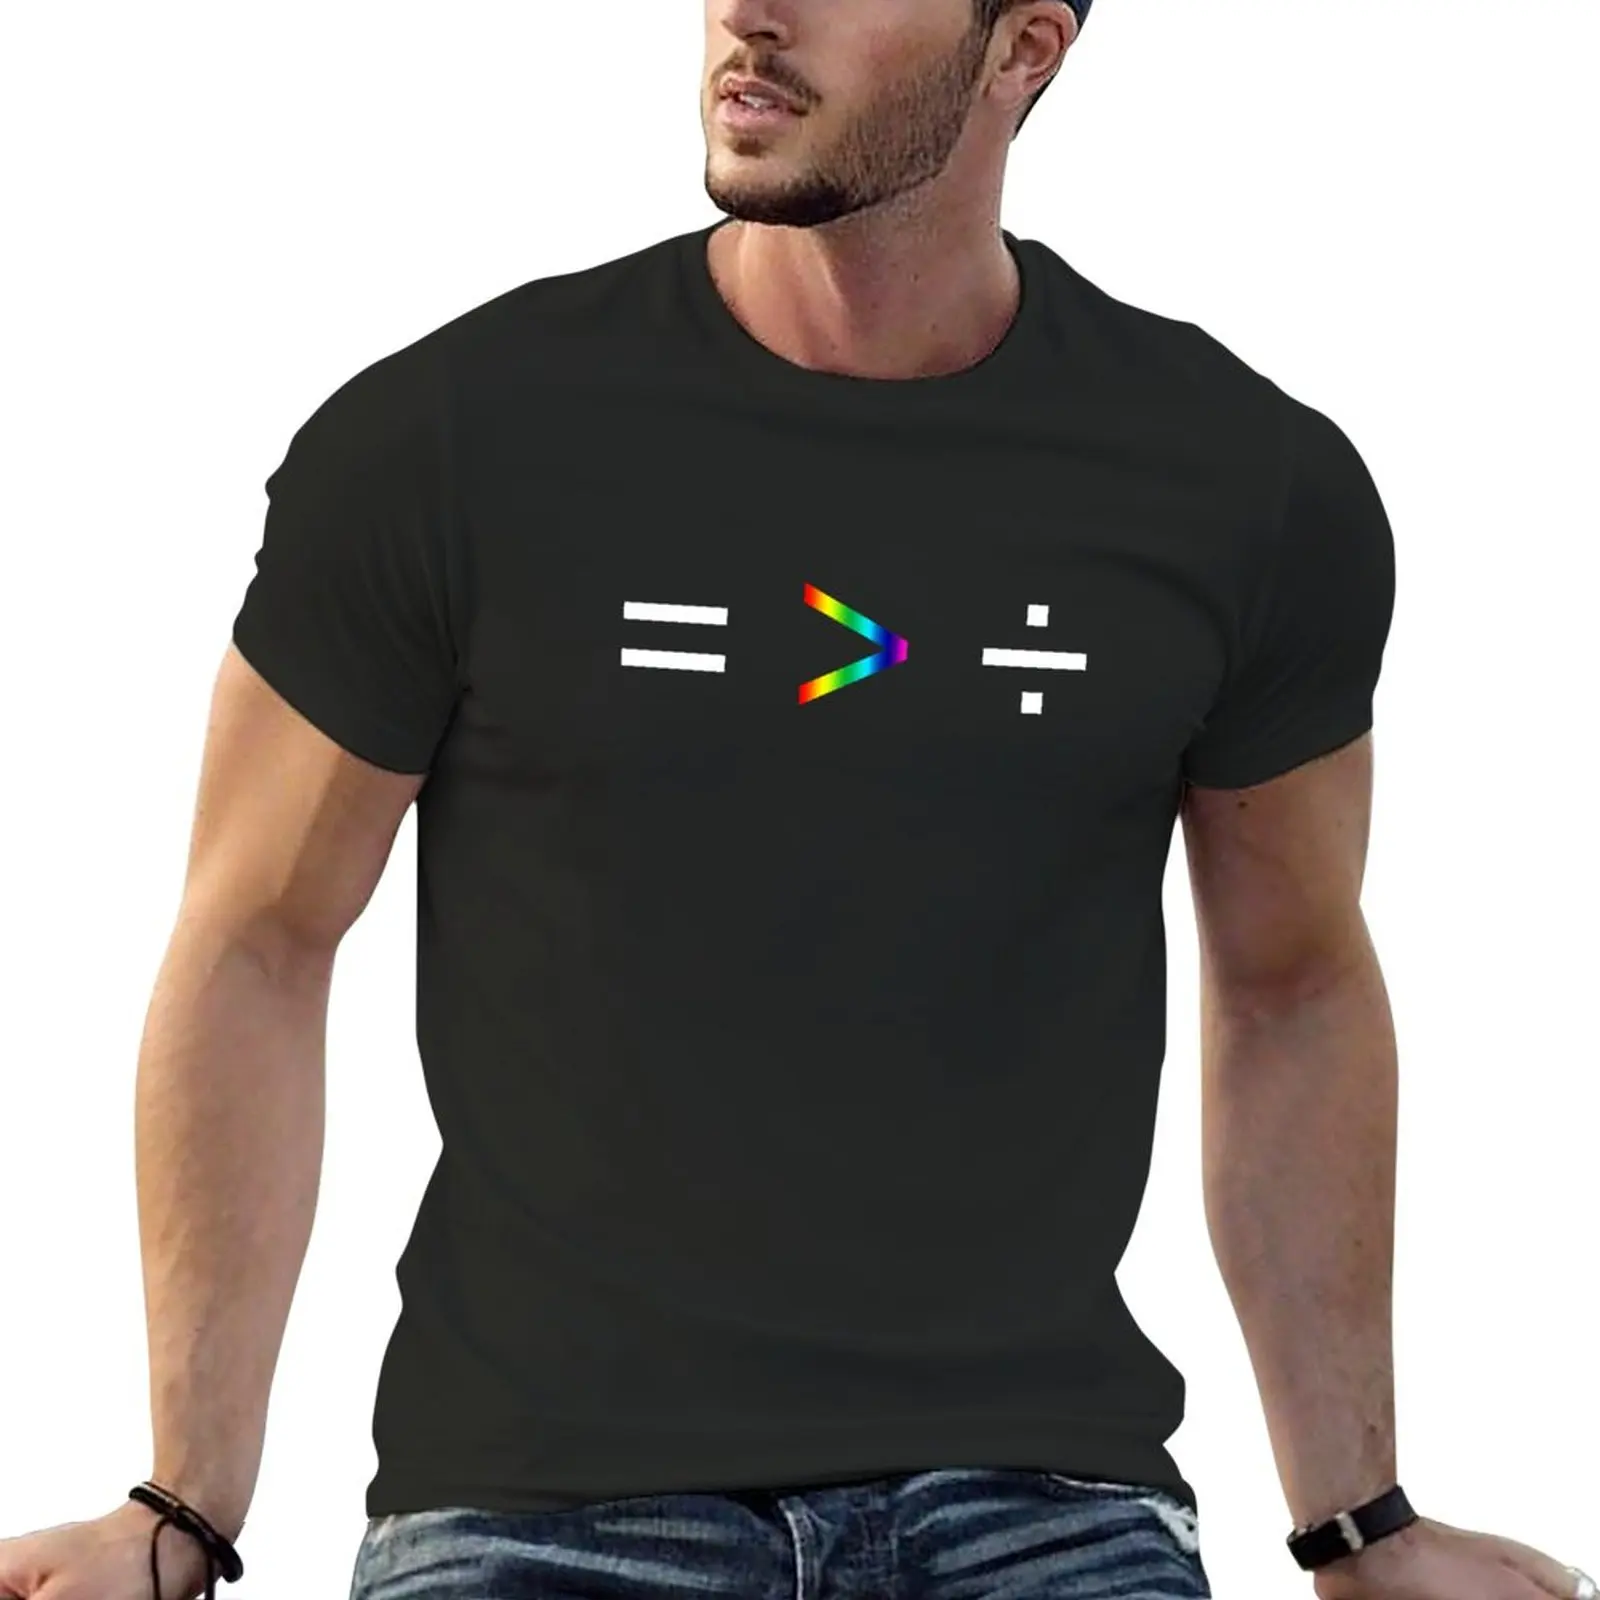 

New Equality is greater than Division Rainbow T-Shirt quick-drying t-shirt quick drying shirt black t shirts for men